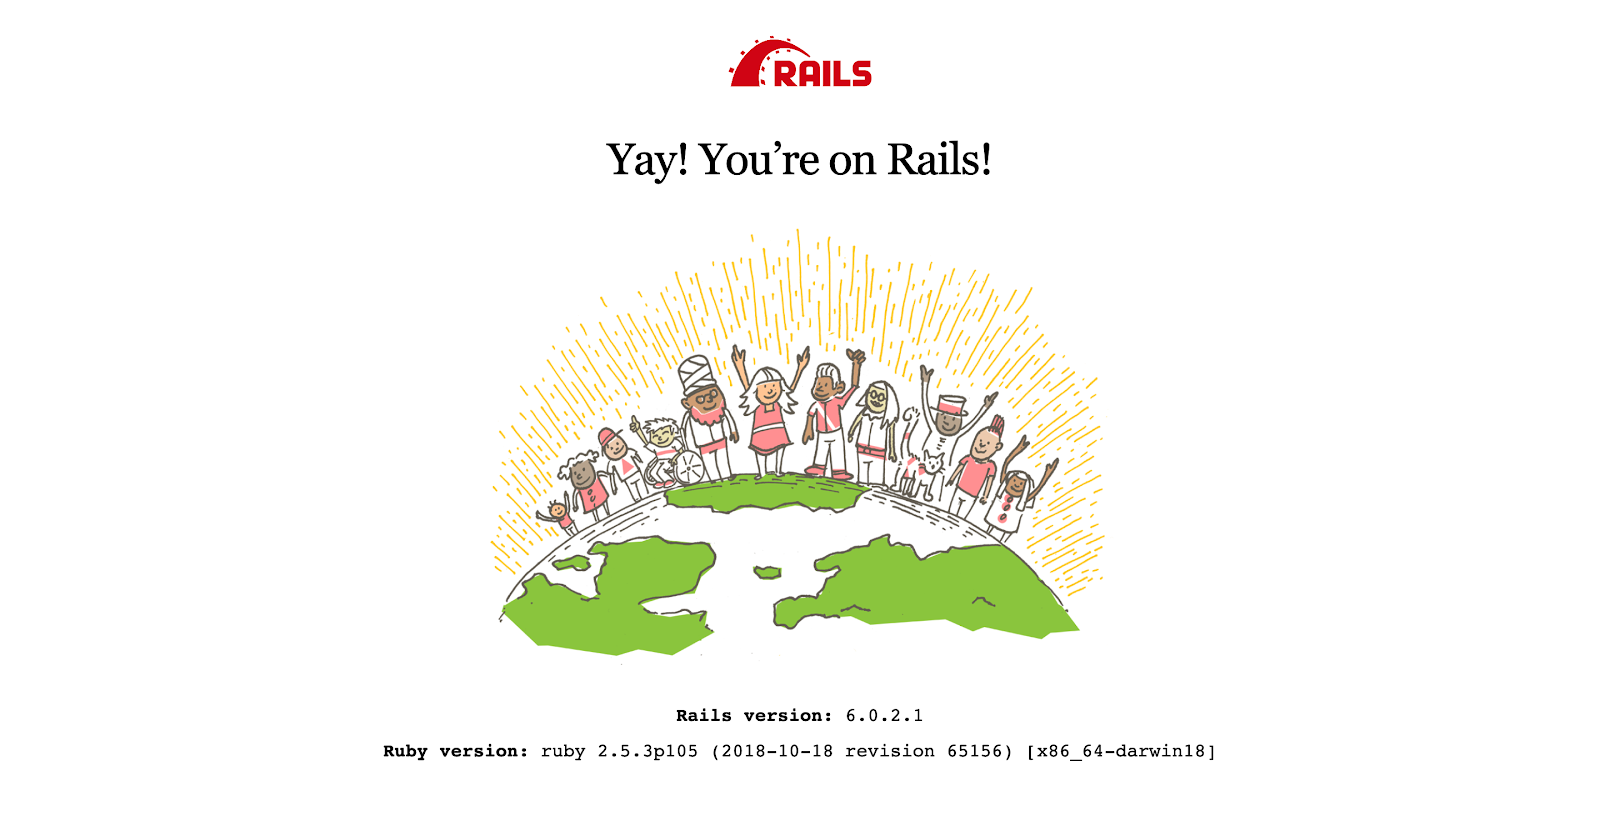 Yay! You’re on Rails! confirmation